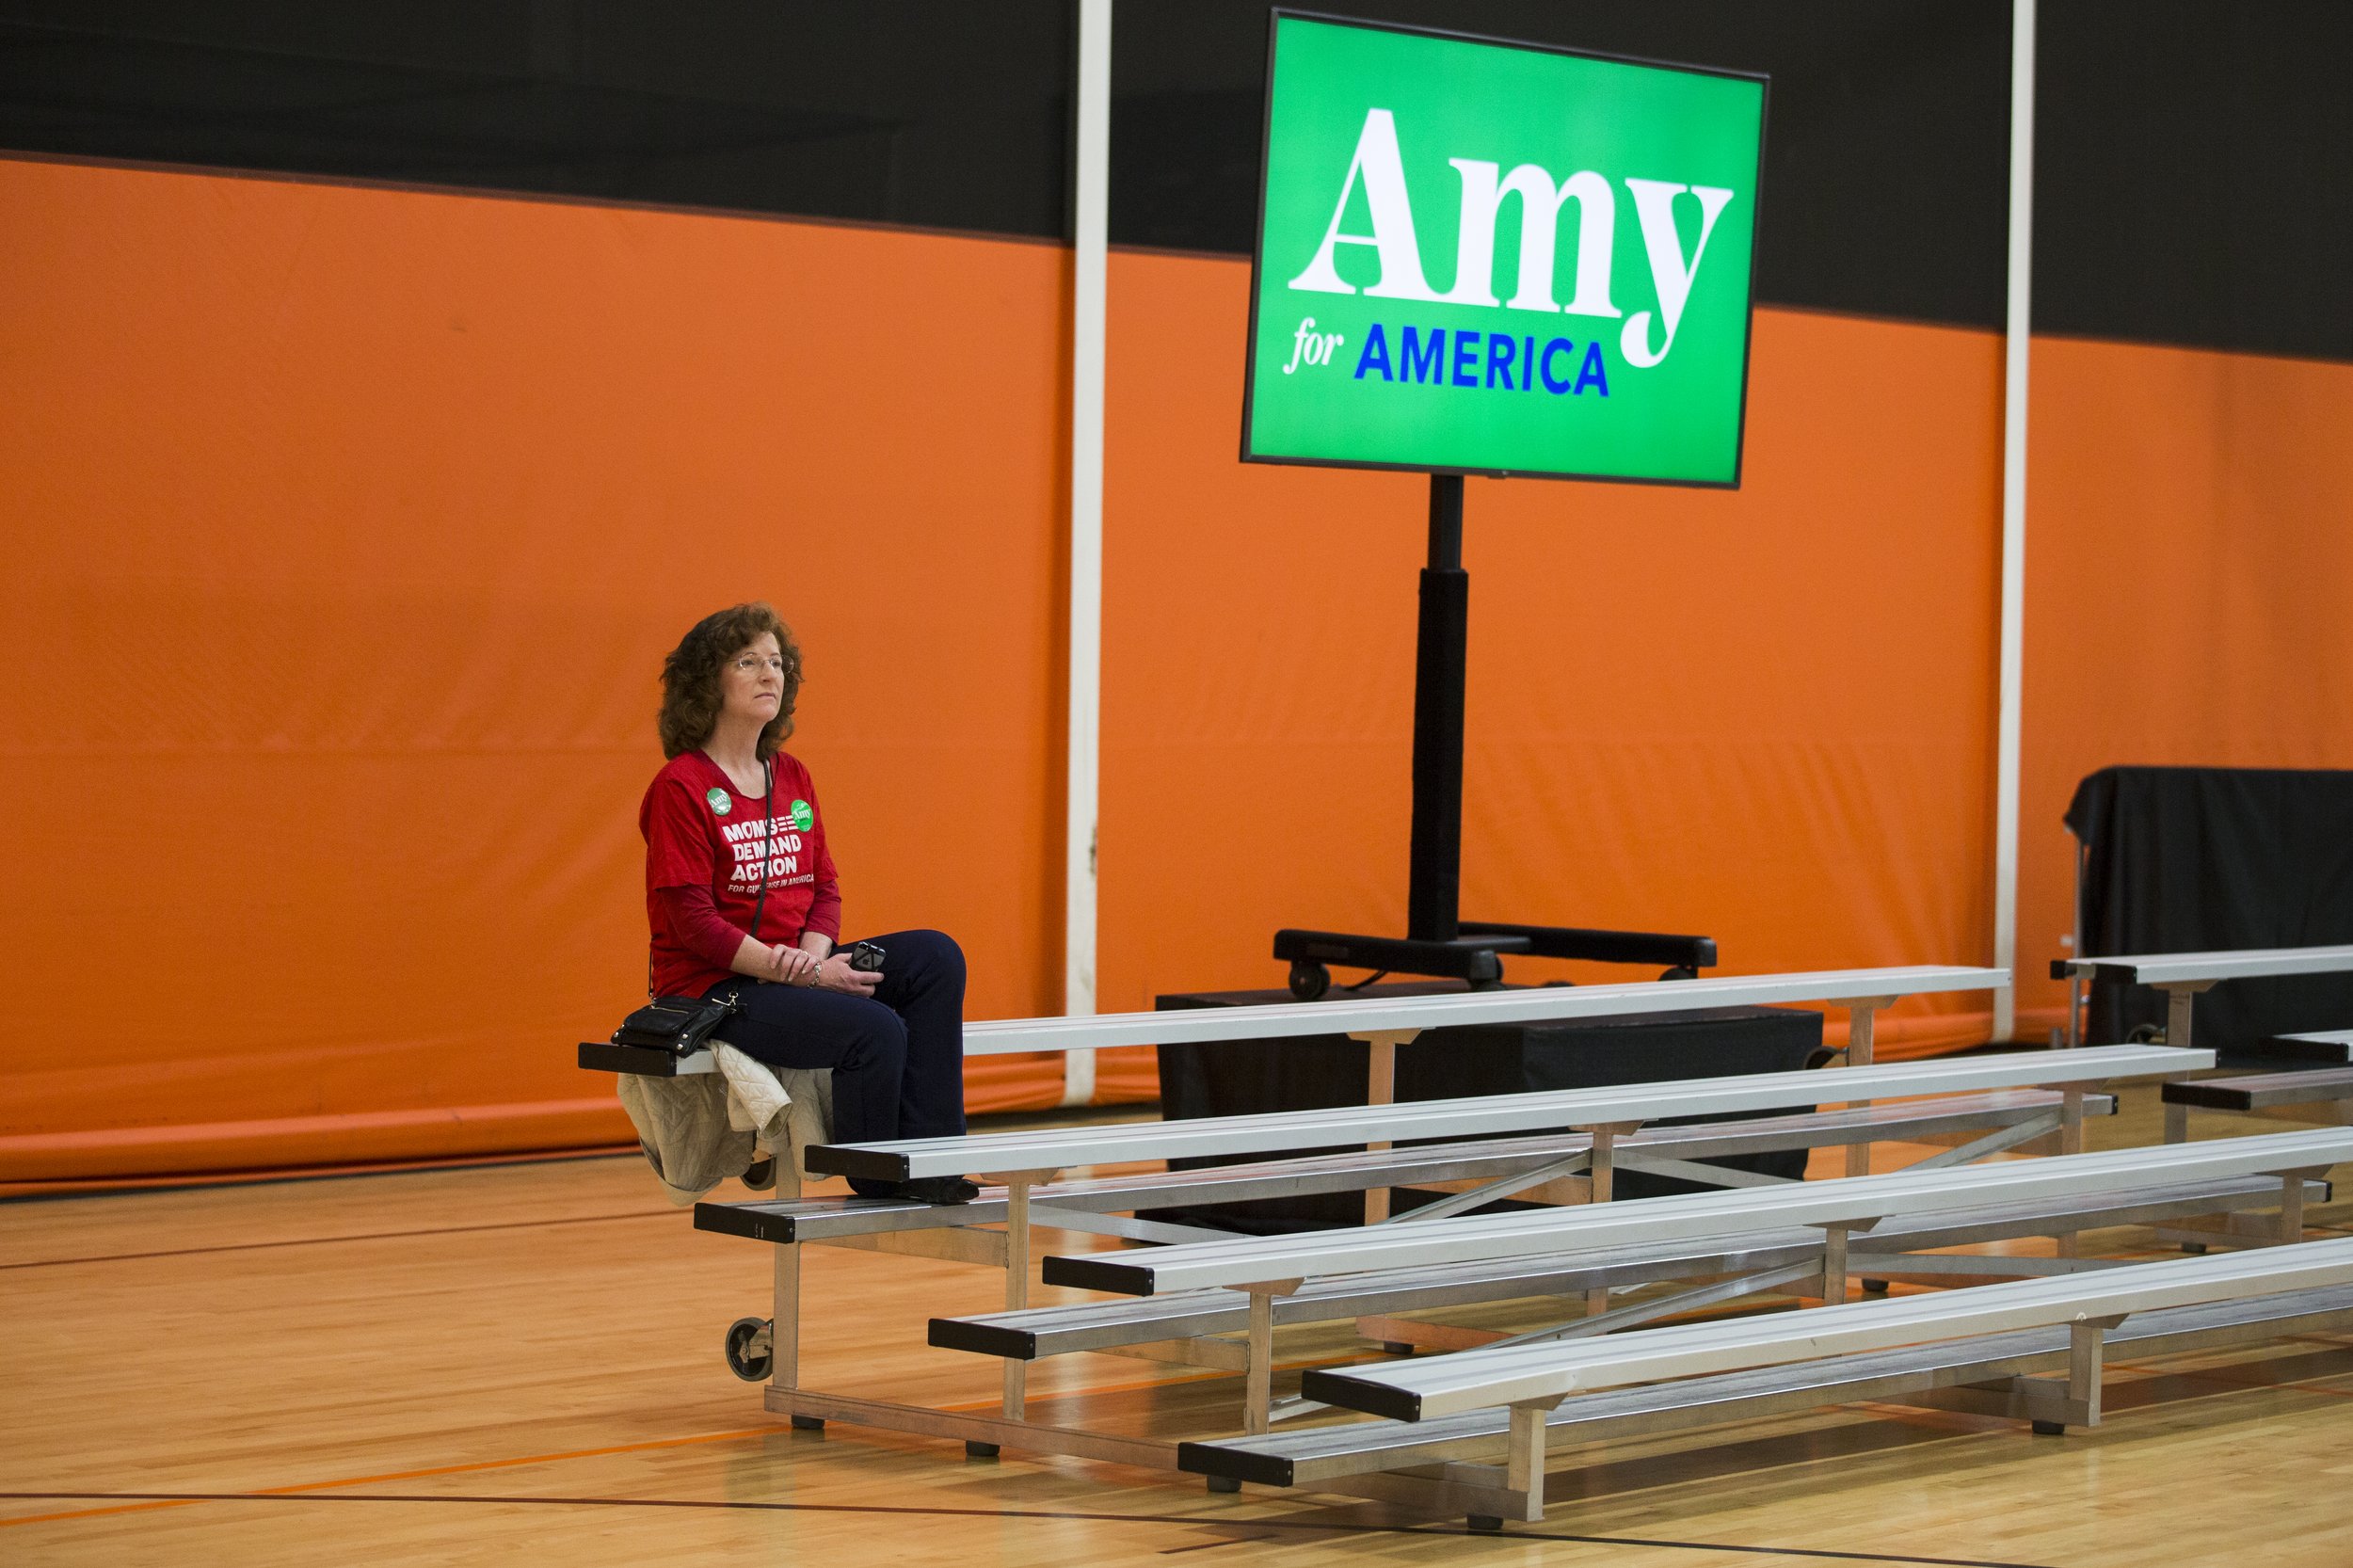  A supporter of senator Amy Klobuchar sits prior to her rally hosted at St. Louis Park High School on March 1, 2020. (Liam James Doyle for MPR News) 